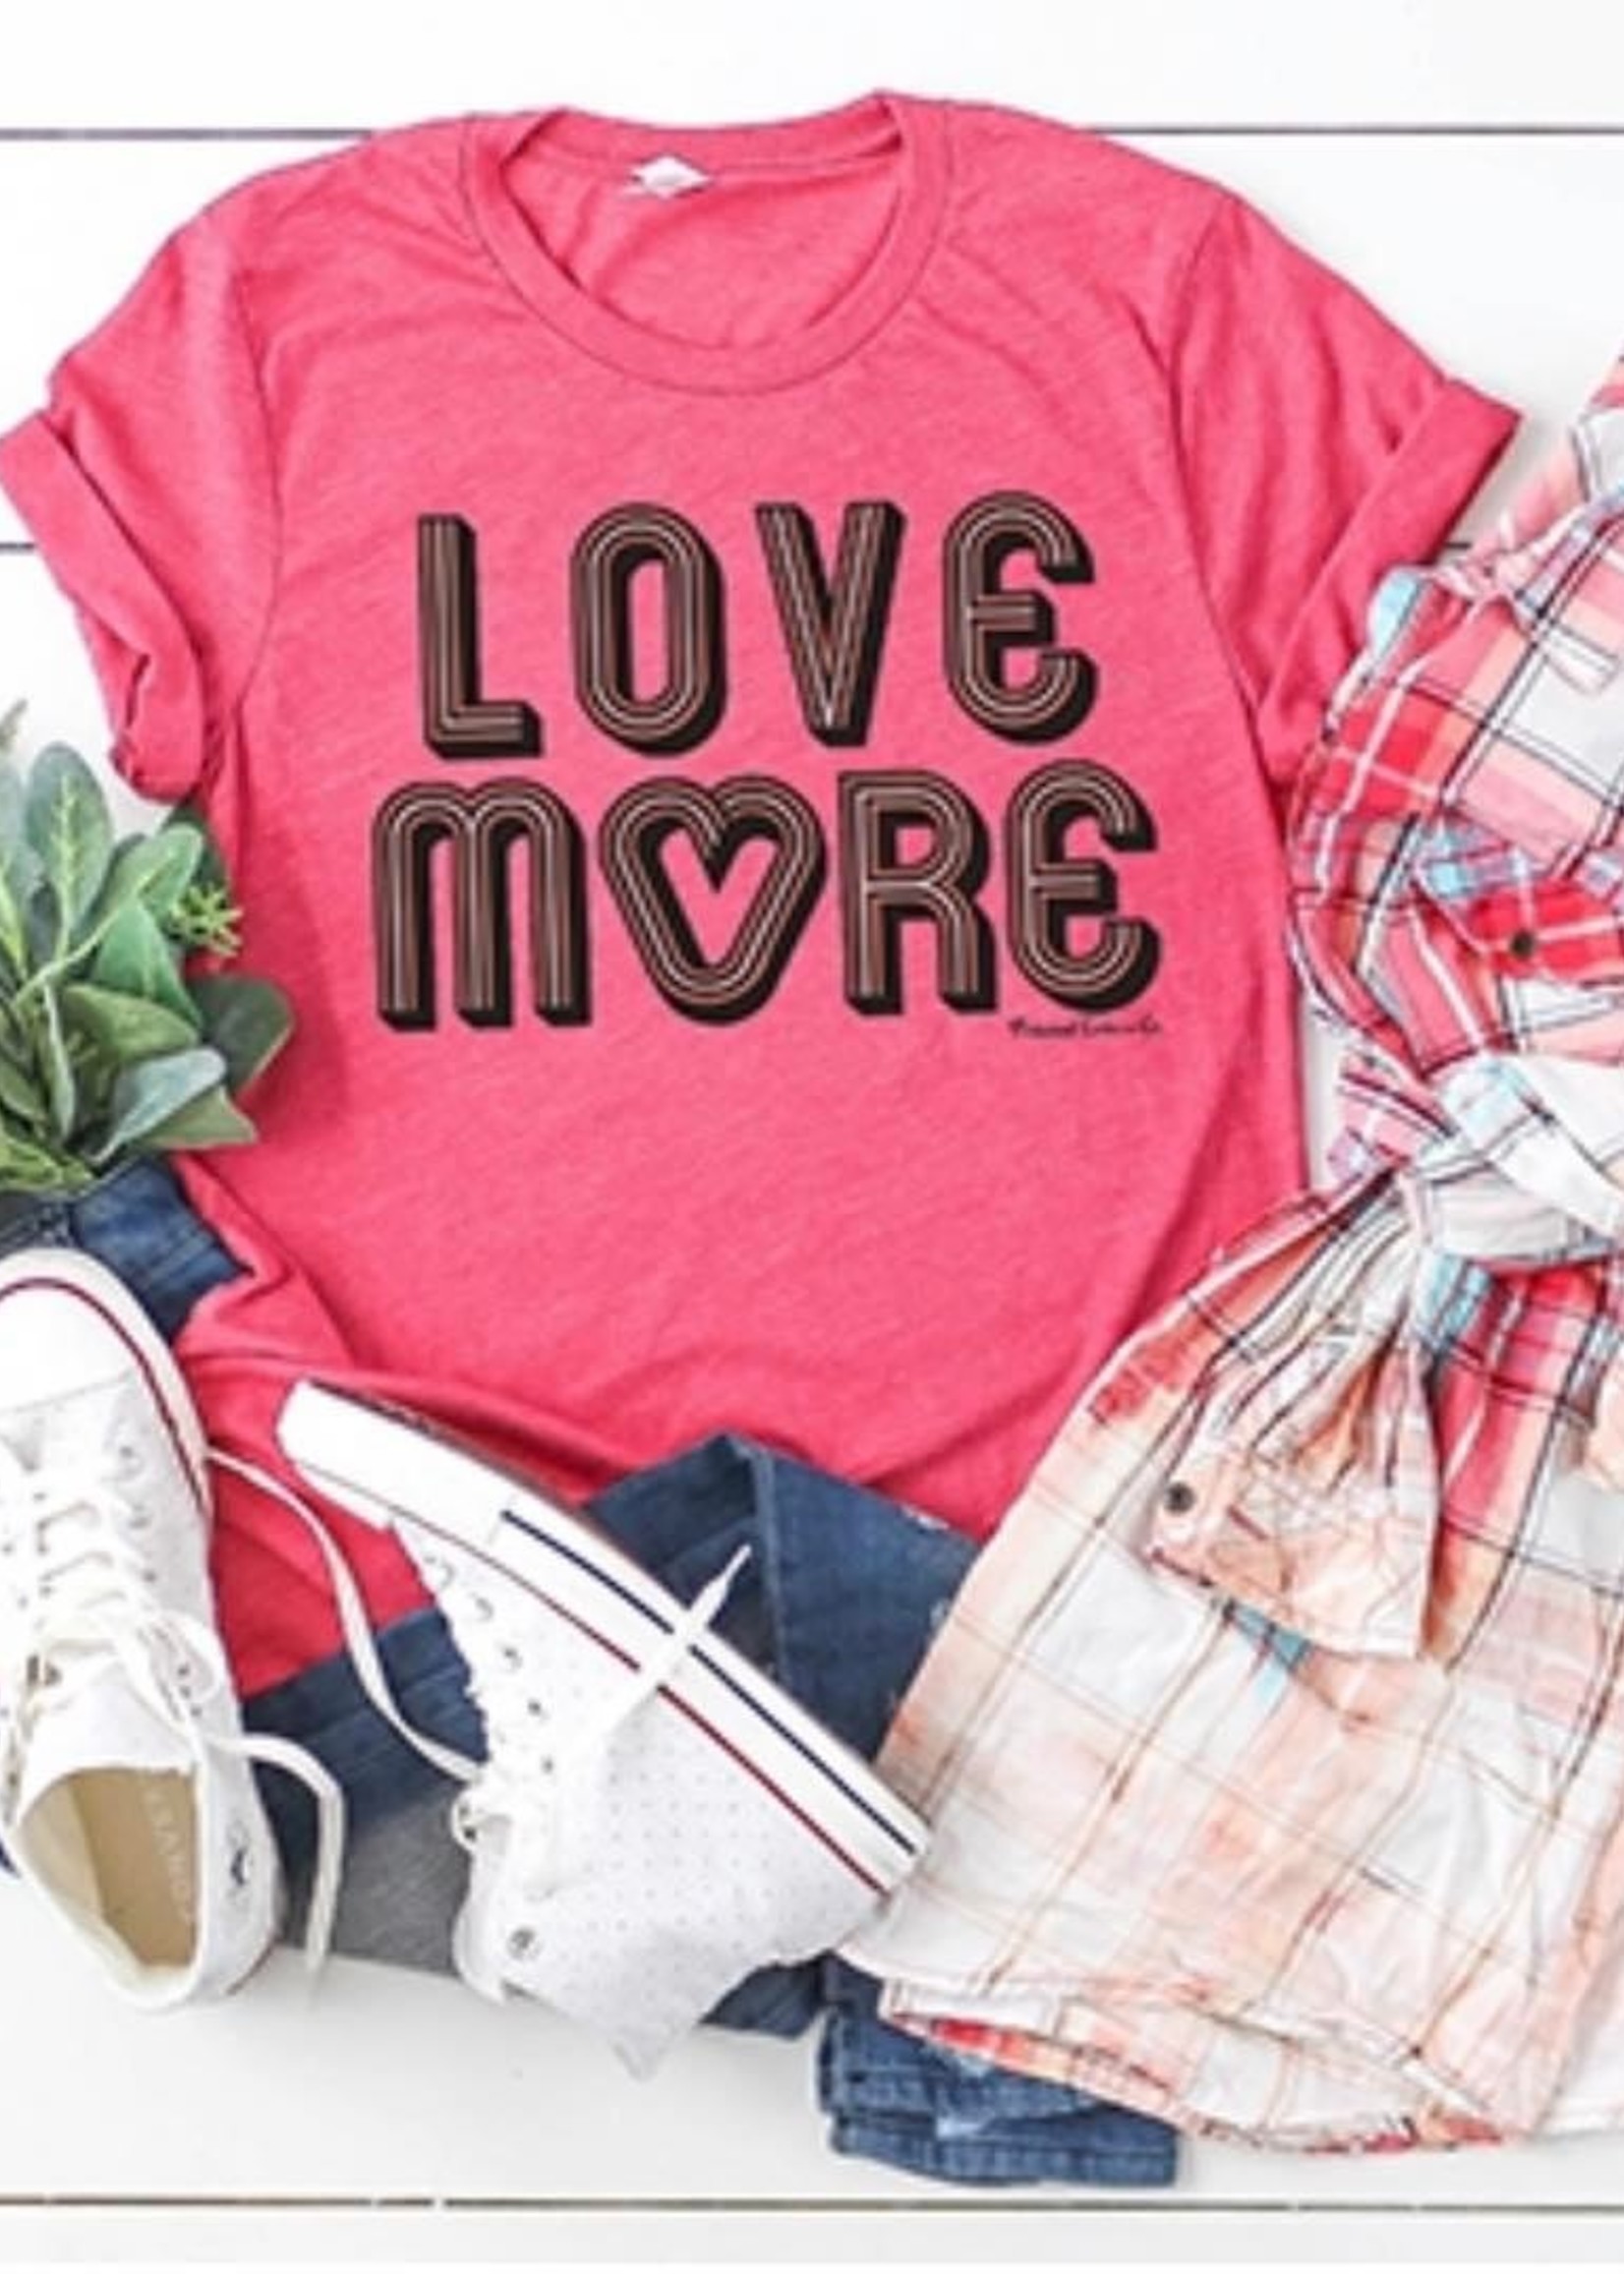 Love More or Amore Tee